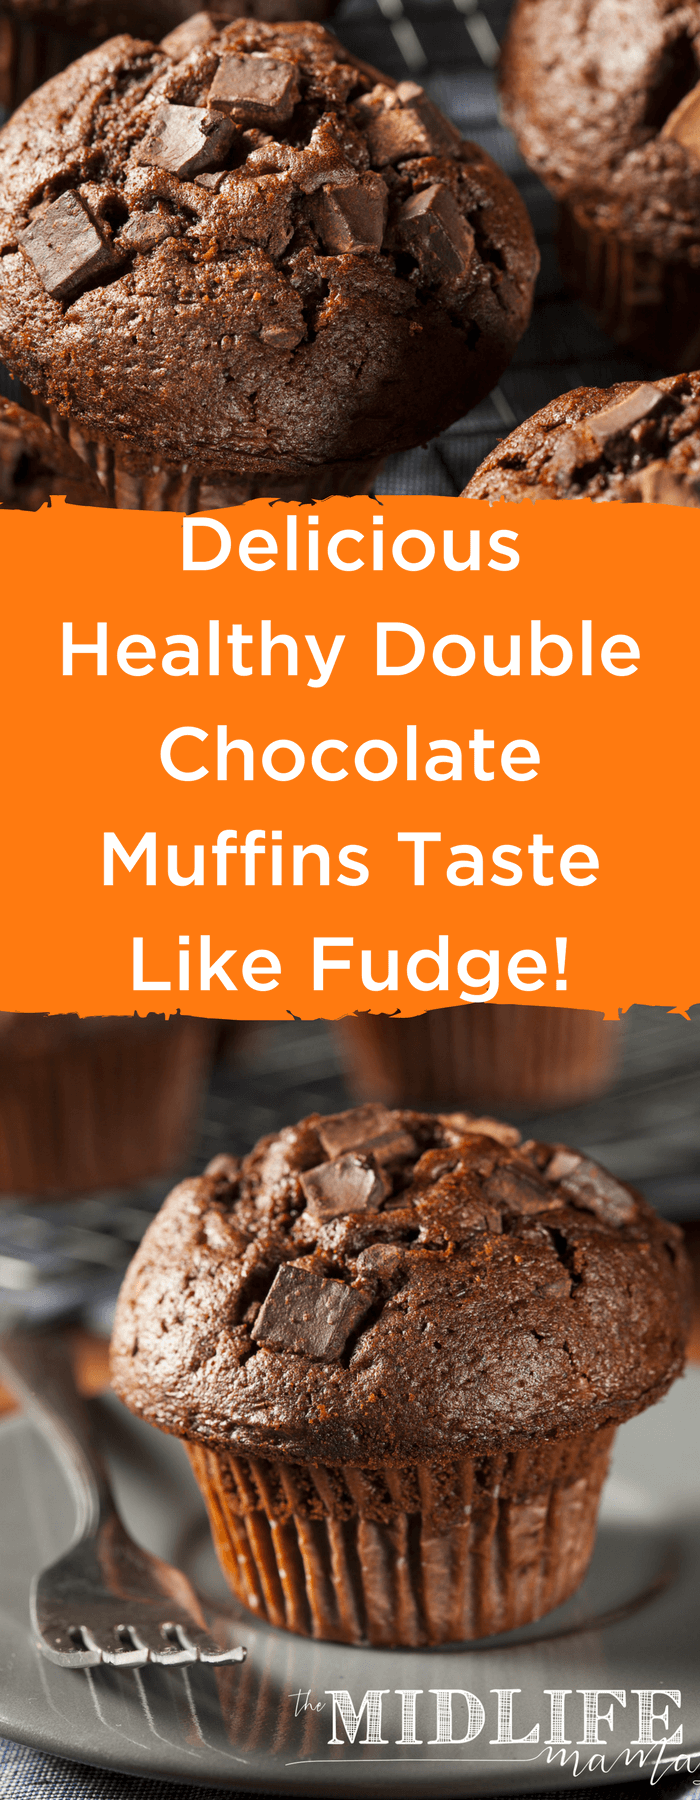 A good allergen free recipe is a must in my home! This recipe for chocolate muffins is filled with wellness to get your day started and keep you going! www.themiflifemamas.com